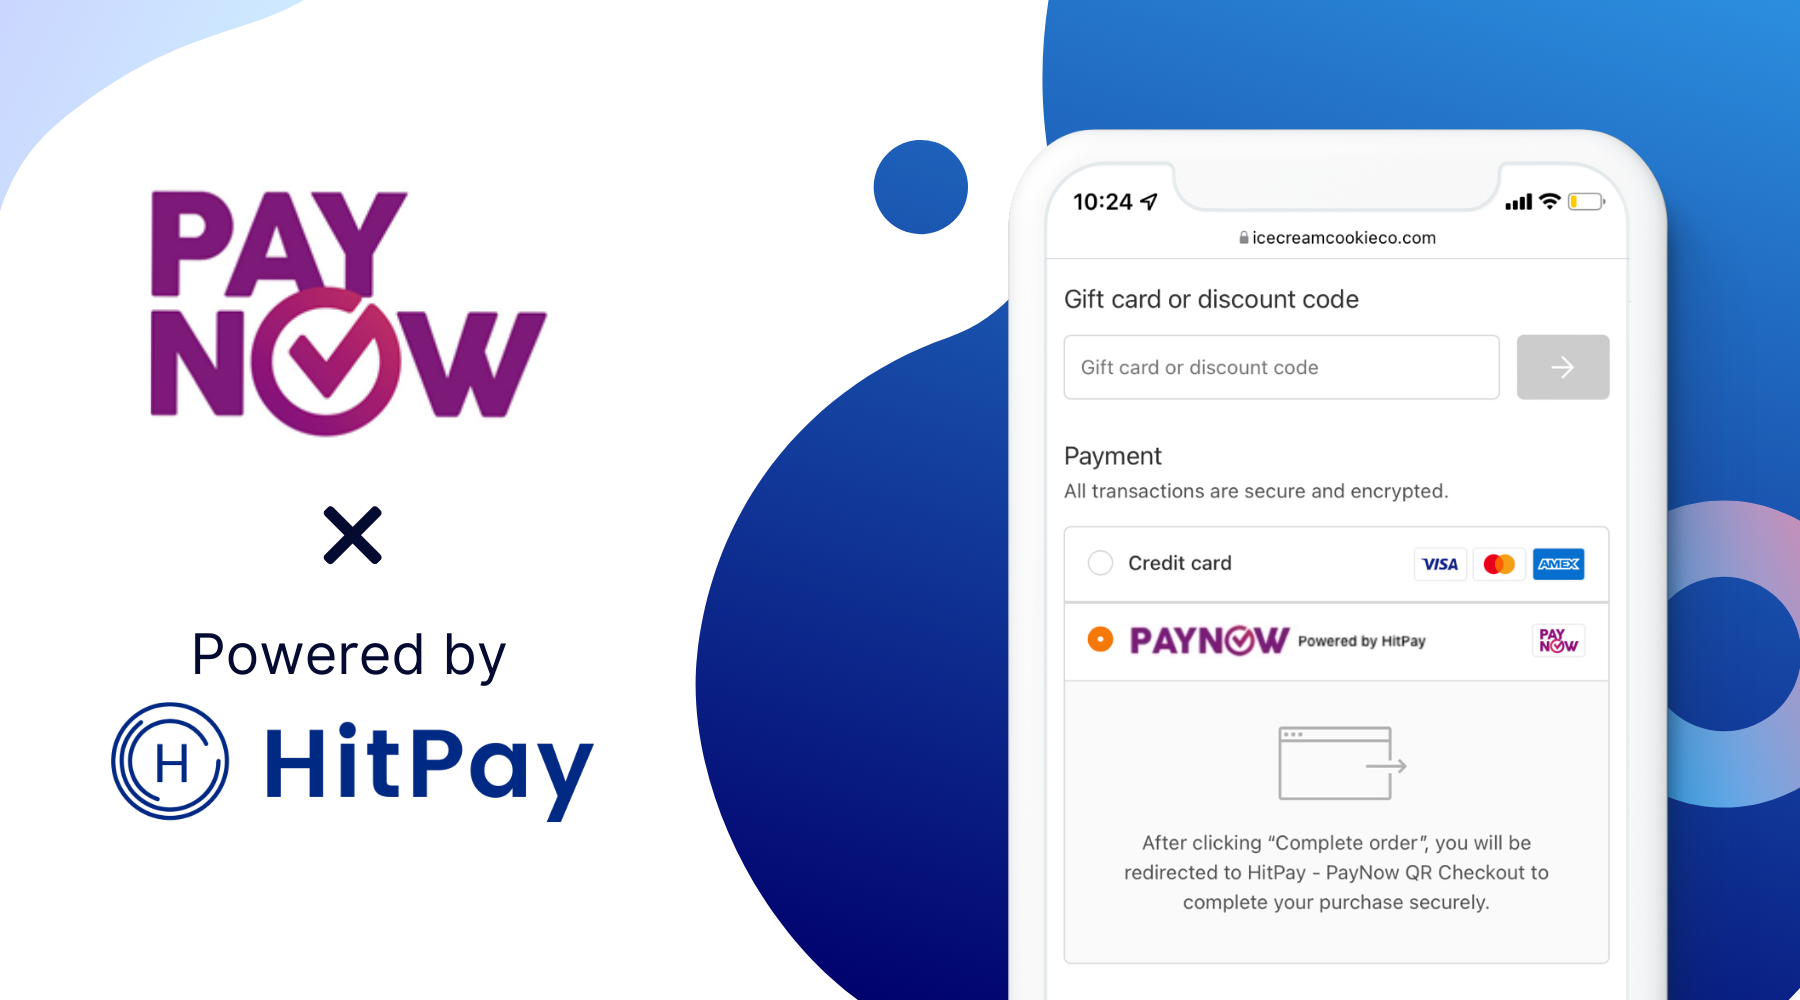 Image showing PayNow Singapore and Powered by HitPay 